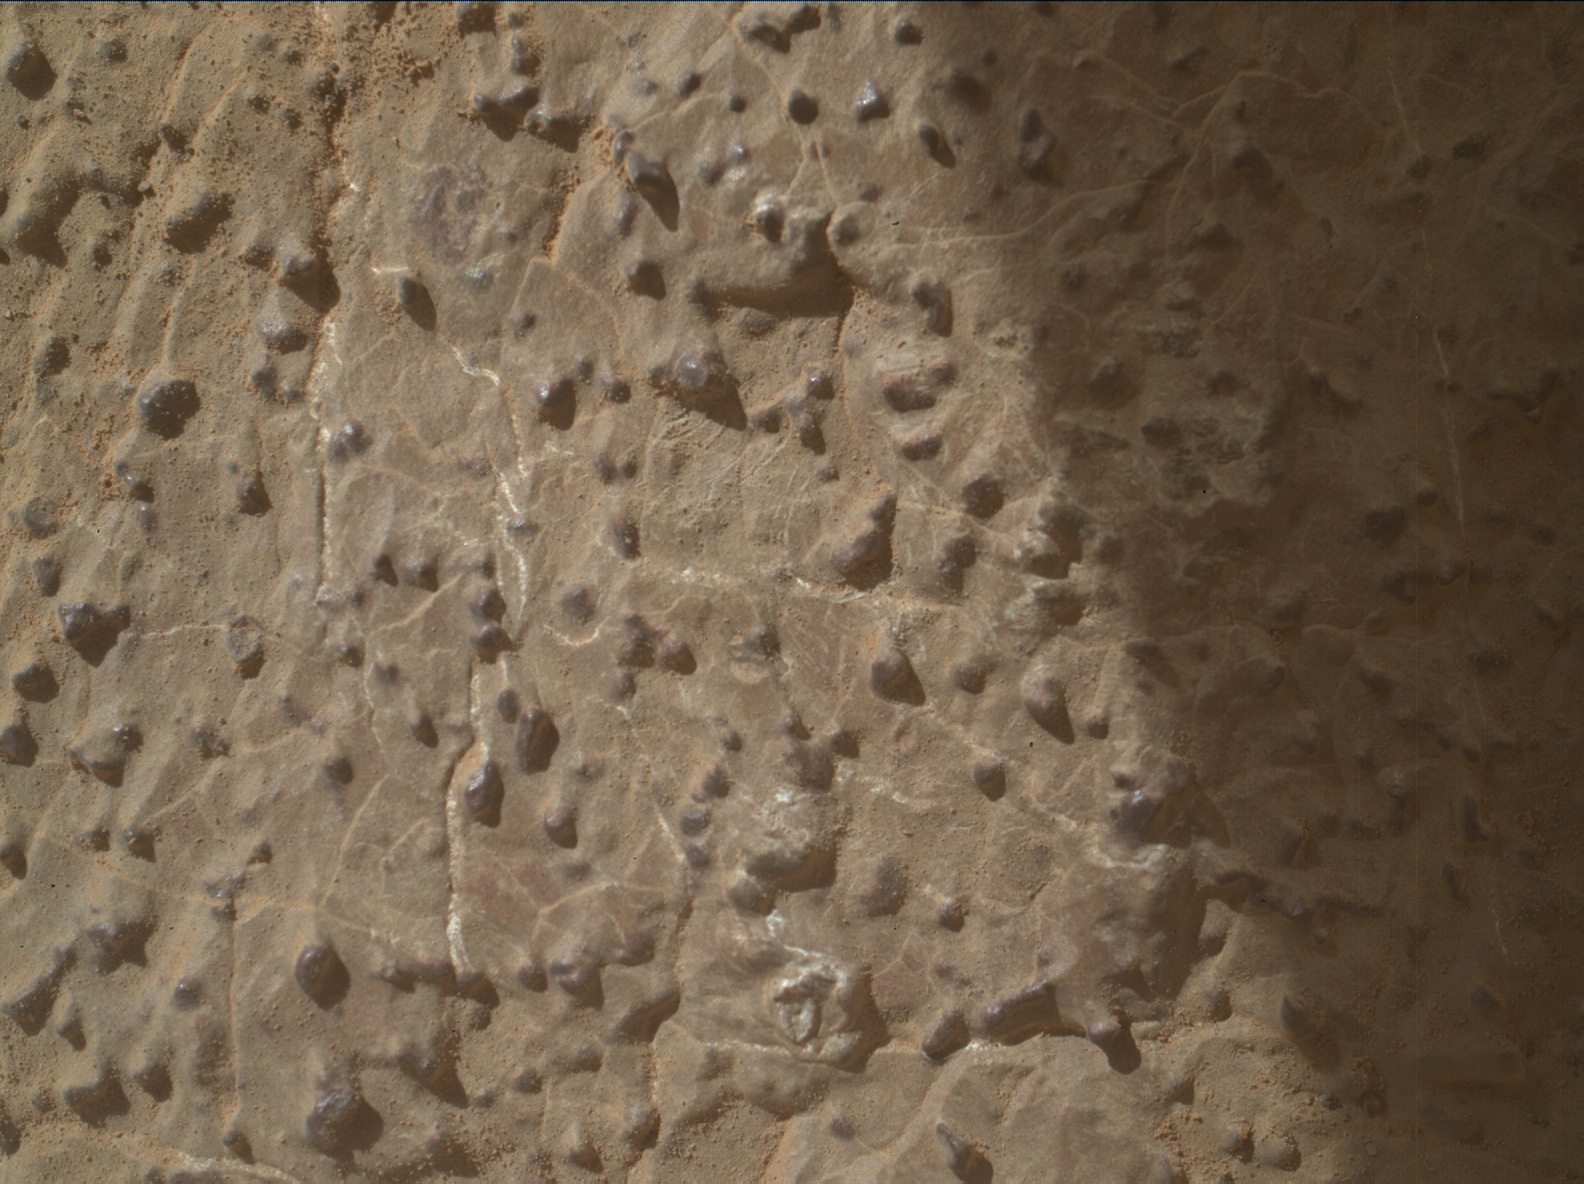 Nasa's Mars rover Curiosity acquired this image using its Mars Hand Lens Imager (MAHLI) on Sol 3037